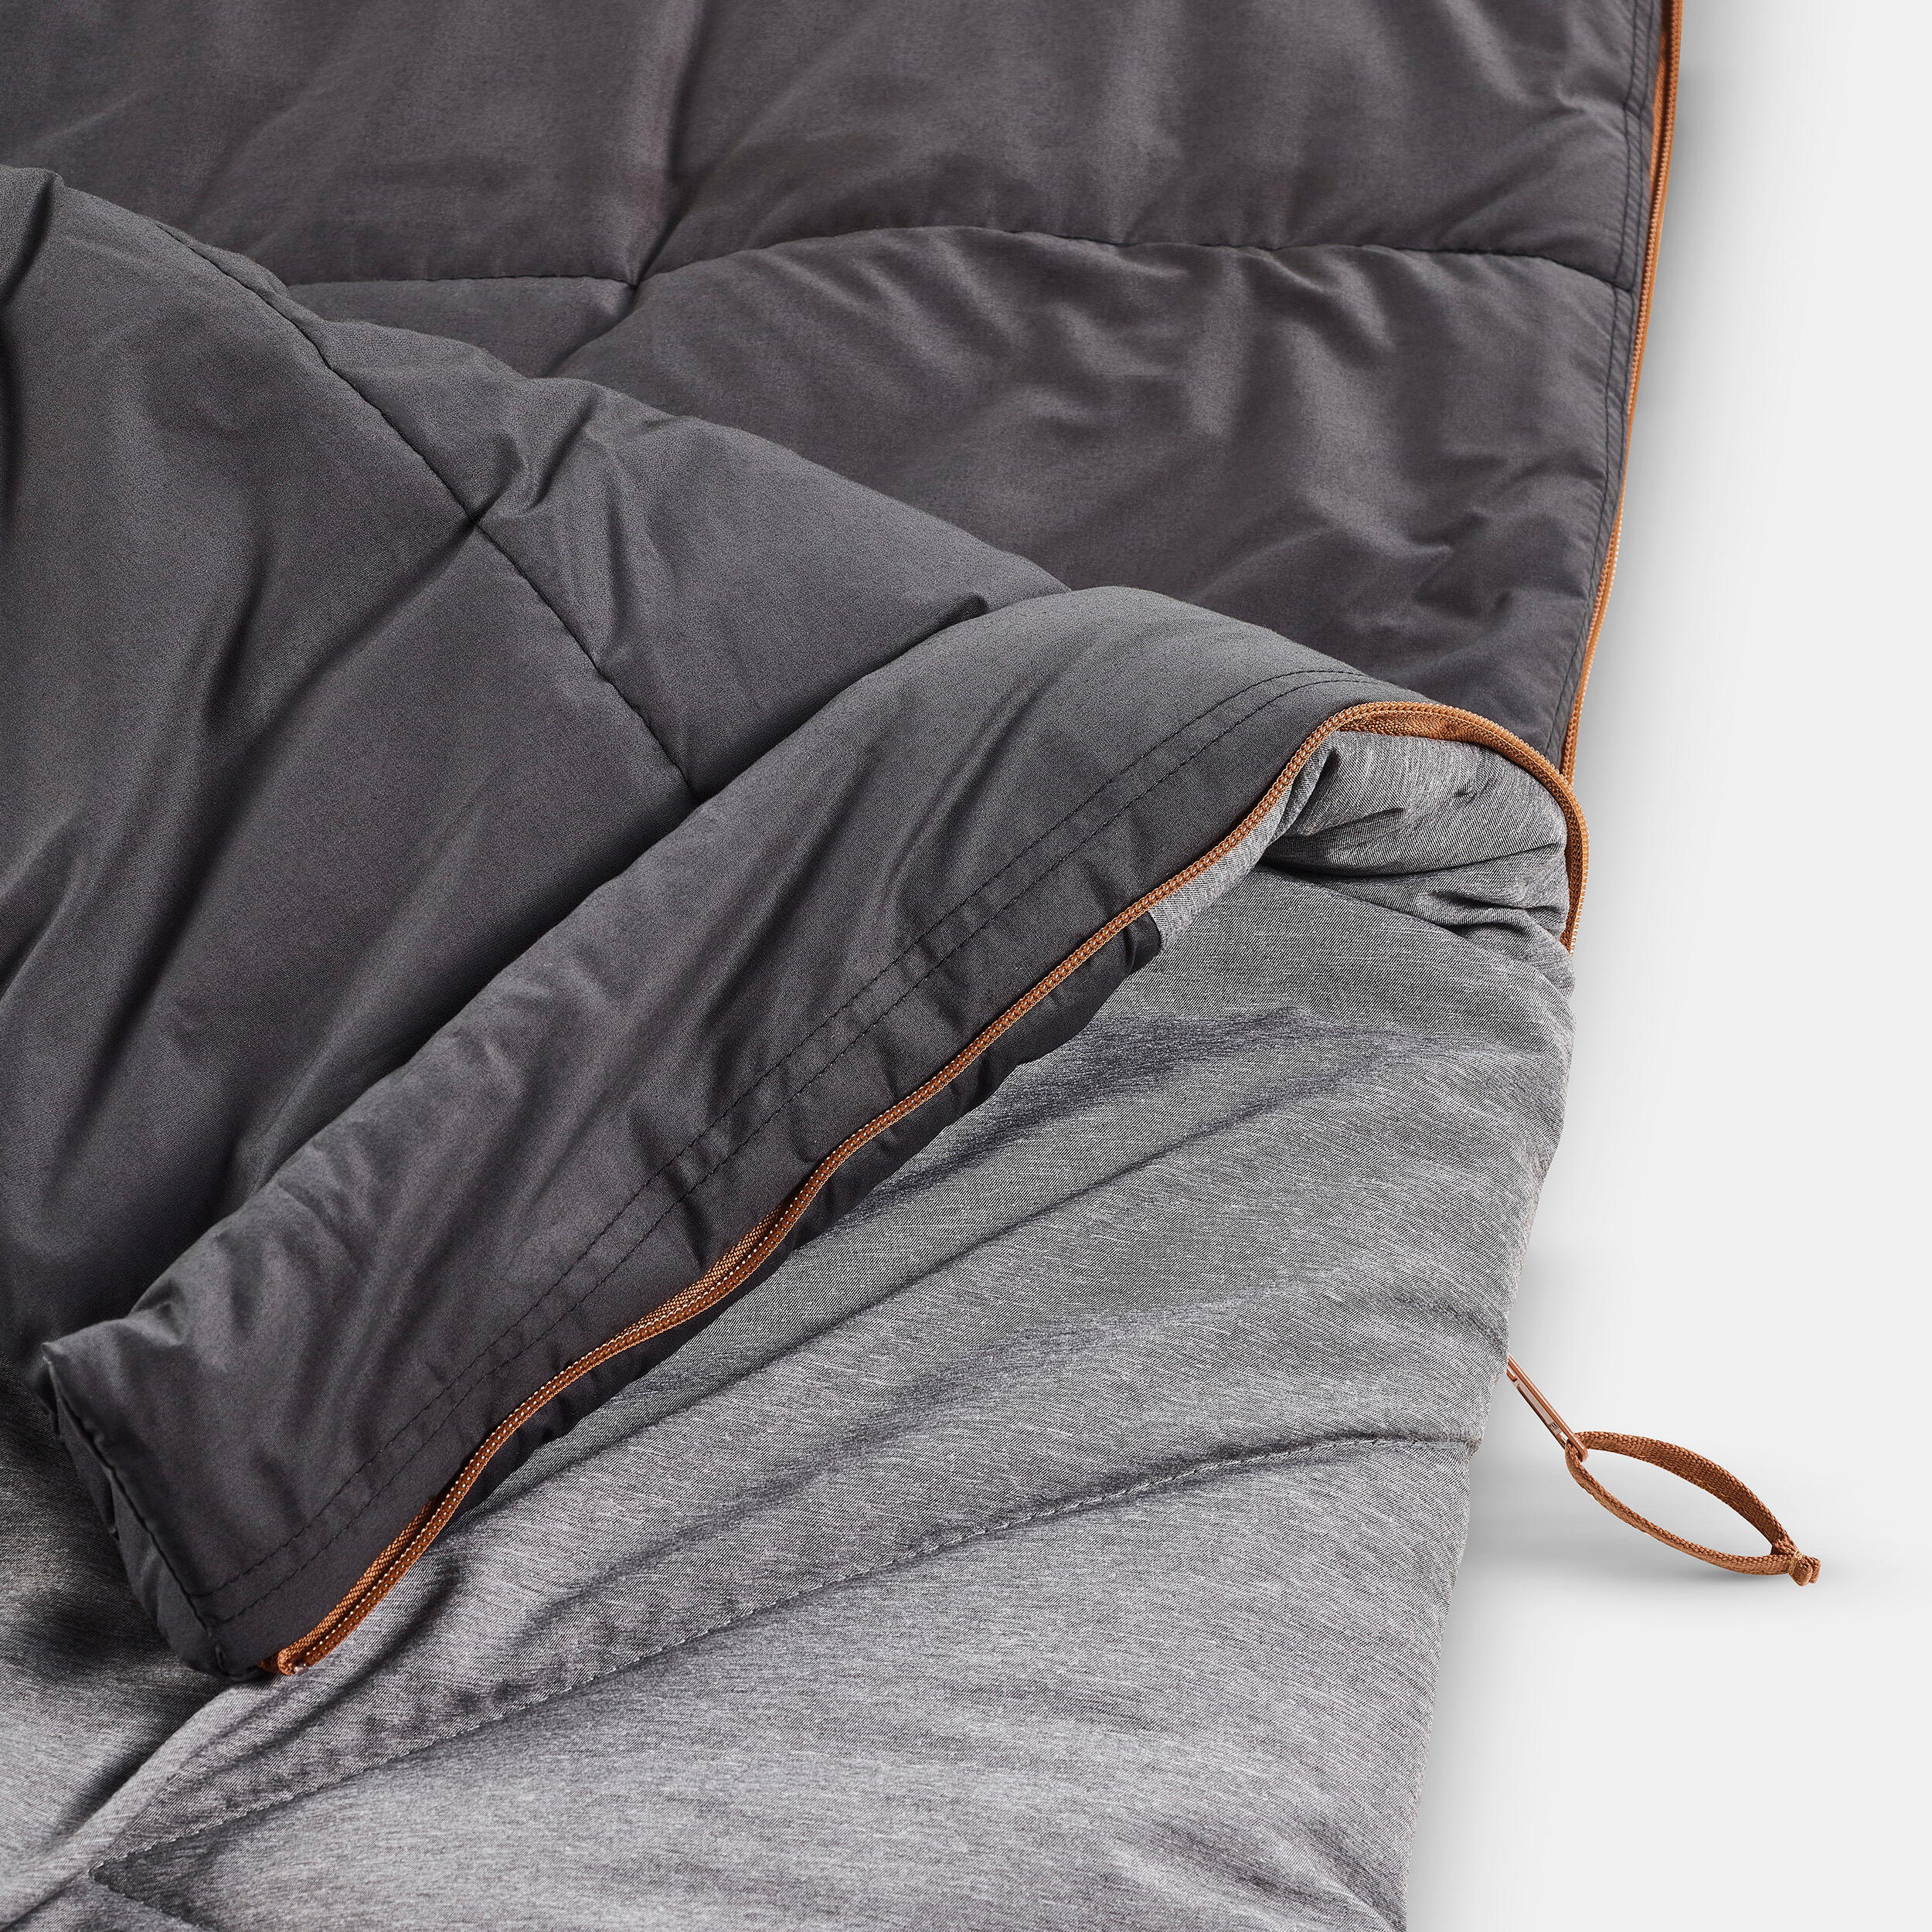 COTTON SLEEPING BAG FOR CAMPING - ARPENAZ 0° COTTON 5/6